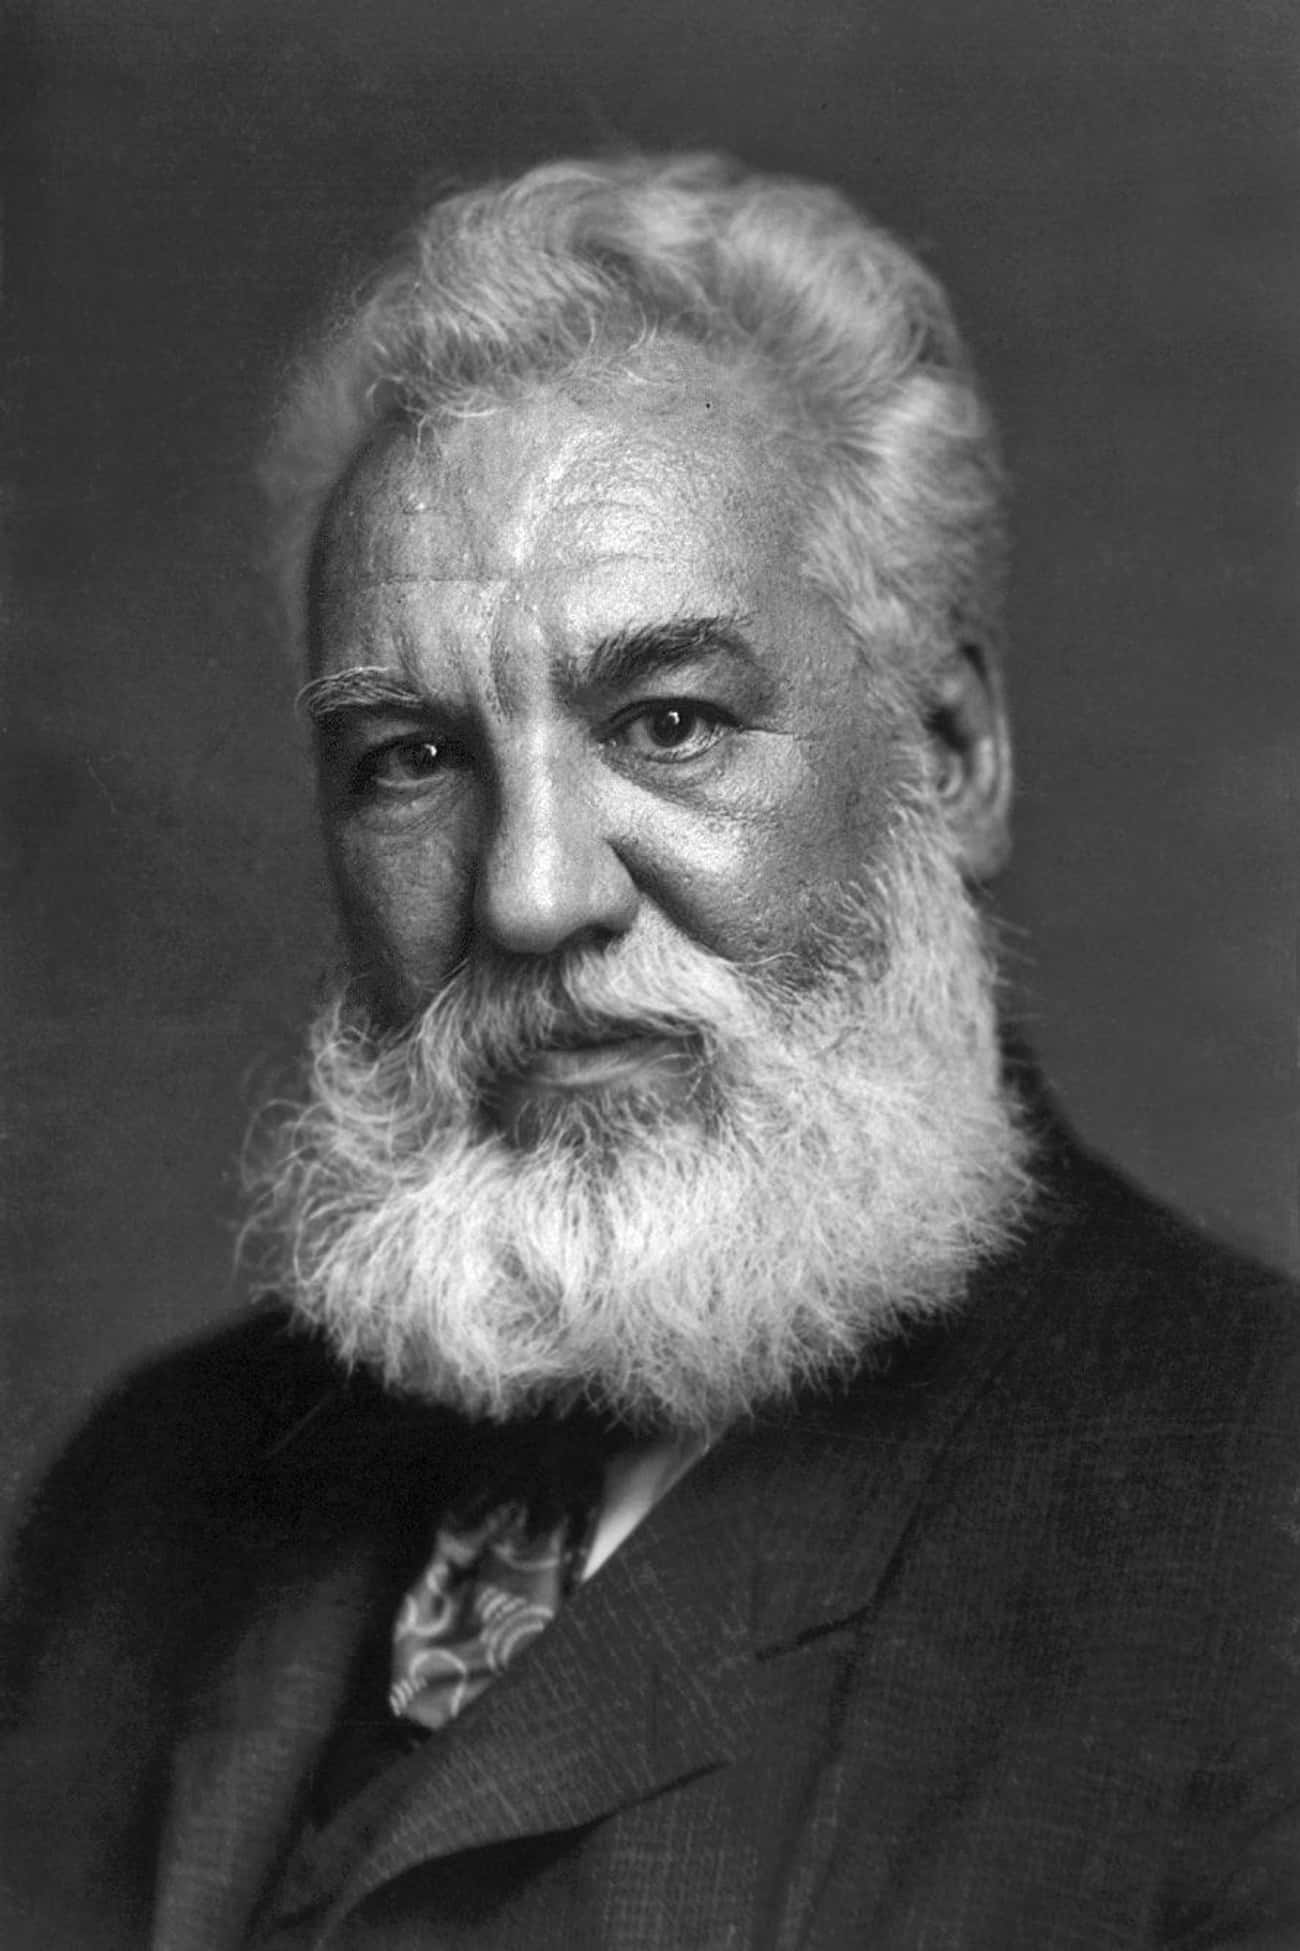 Alexander Graham Bell Was A Eugenicist And Believed Deaf People Should Not Procreate